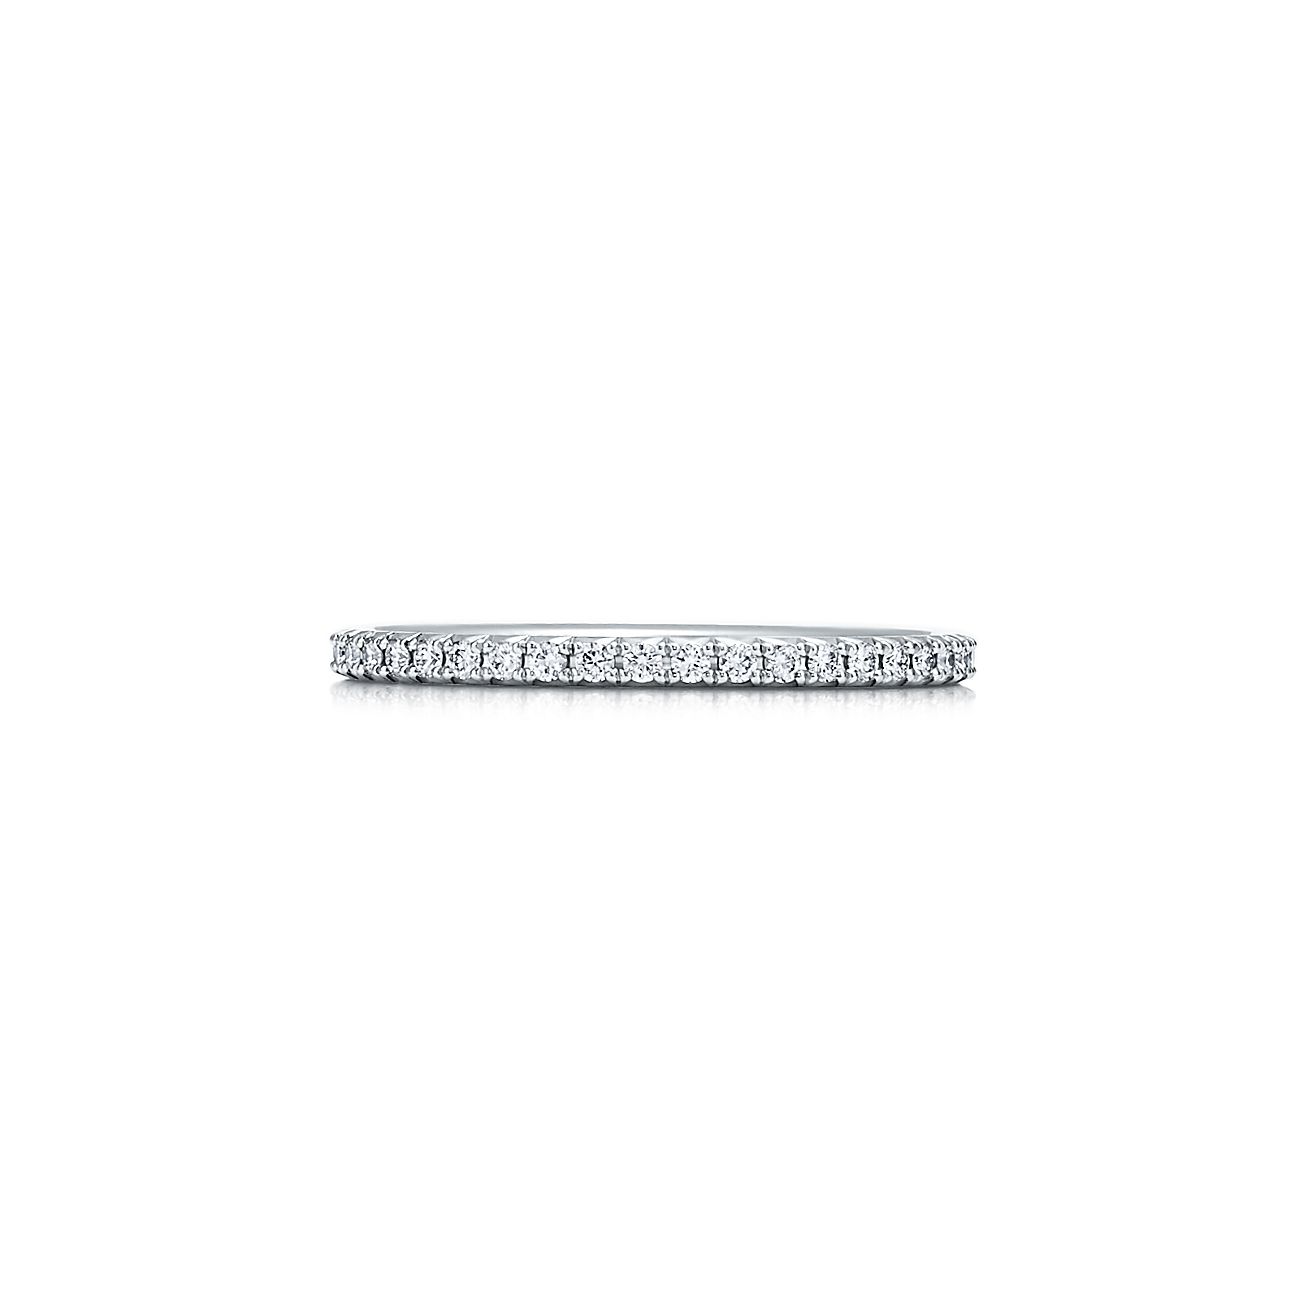 Tiffany Metro ring in platinum with 